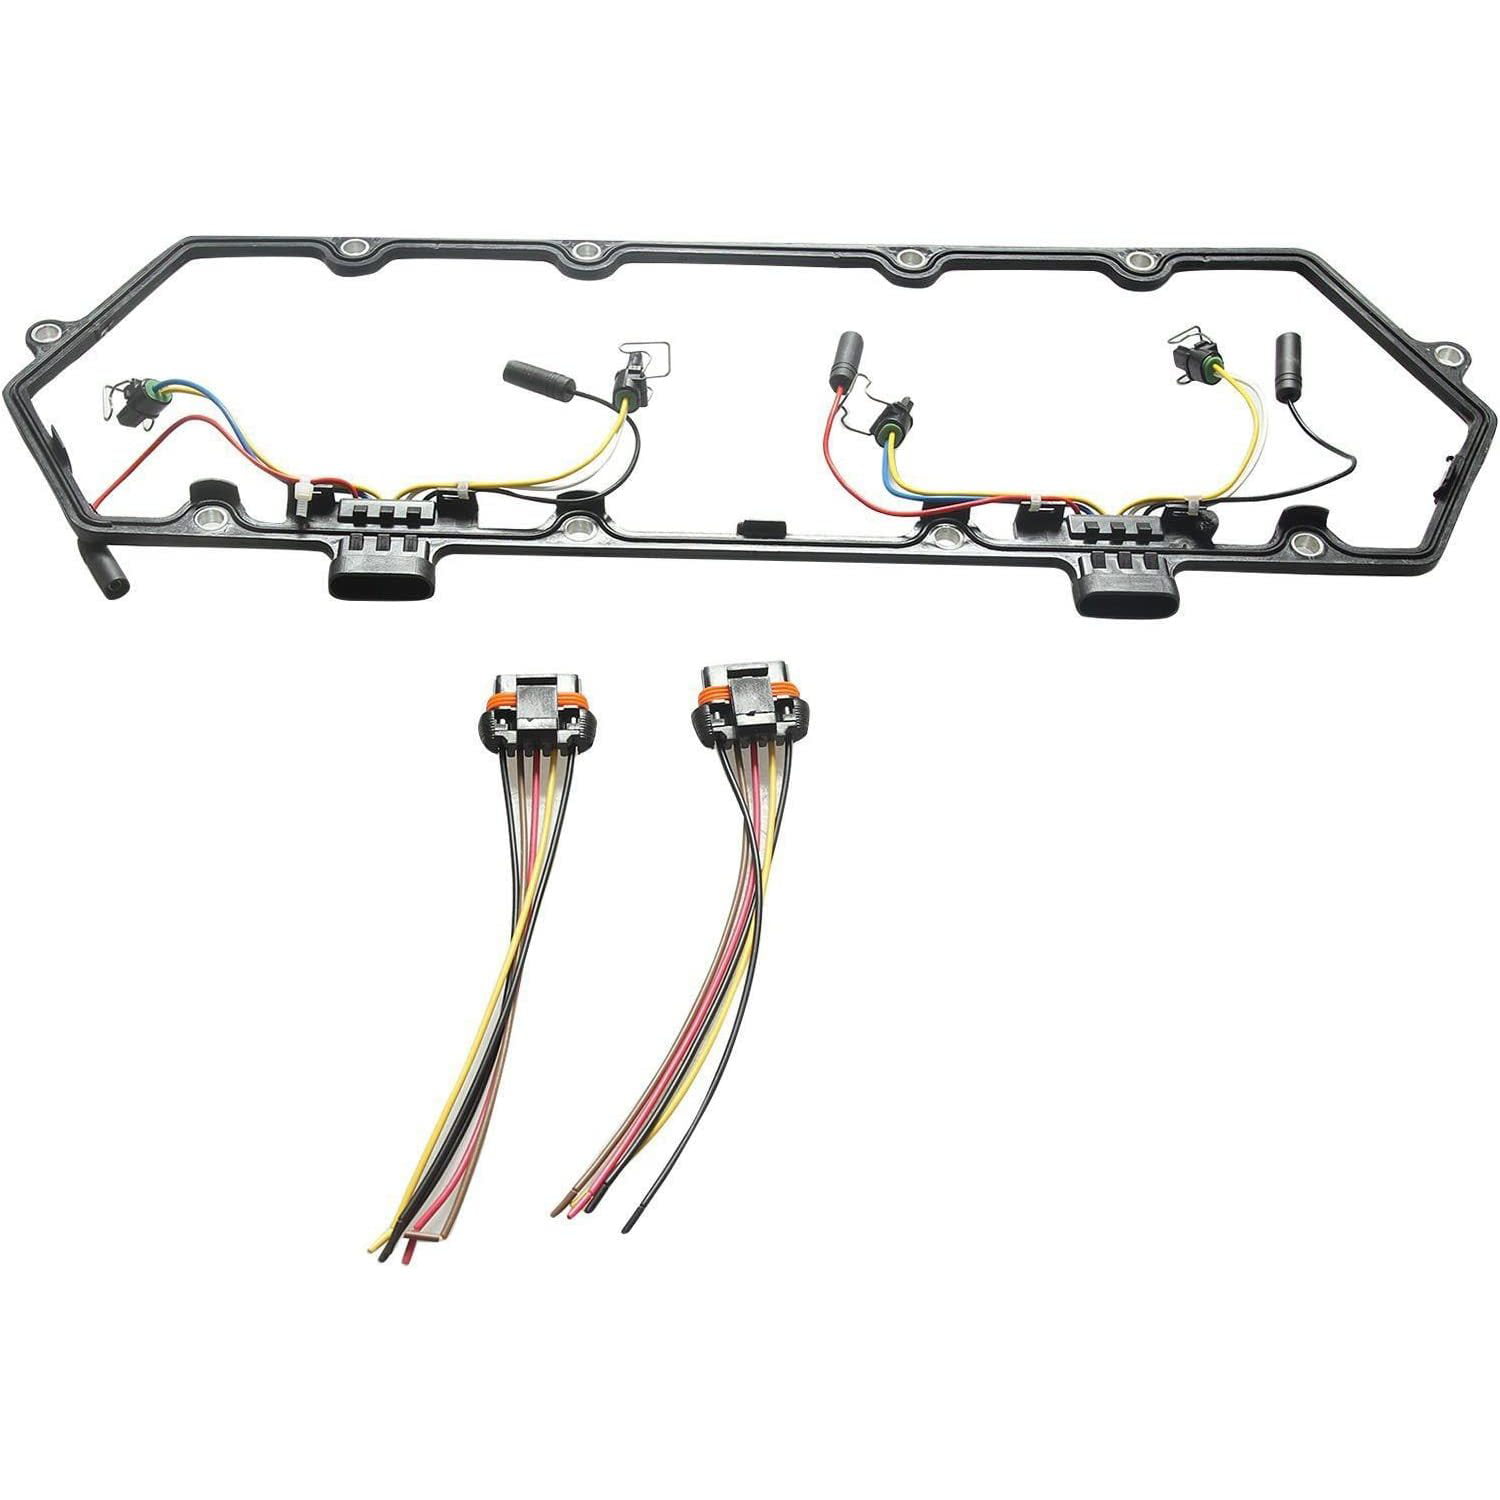 For 7.3L 94-97 Powerstroke New Glow Plugs  Valve Cover Gaskets, New  Version with integrated waterproof injector/glow plug harness